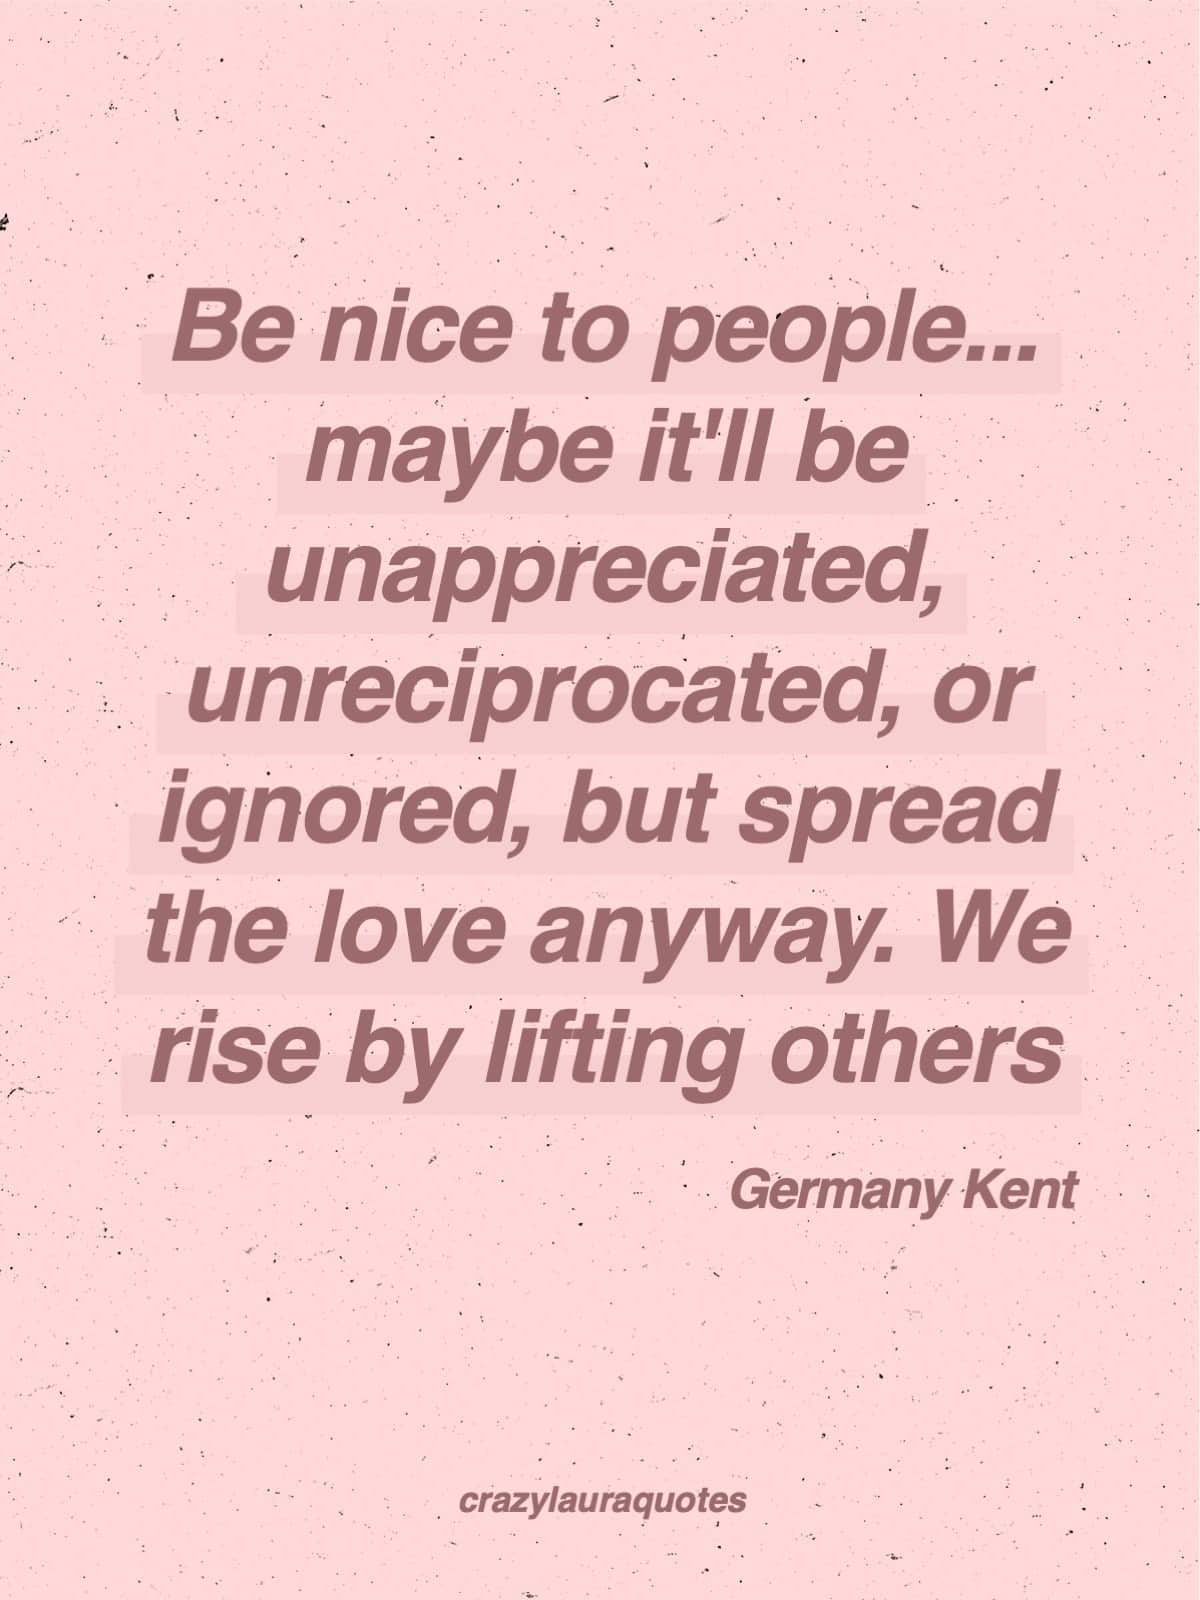 lifting each other up and spread love quote